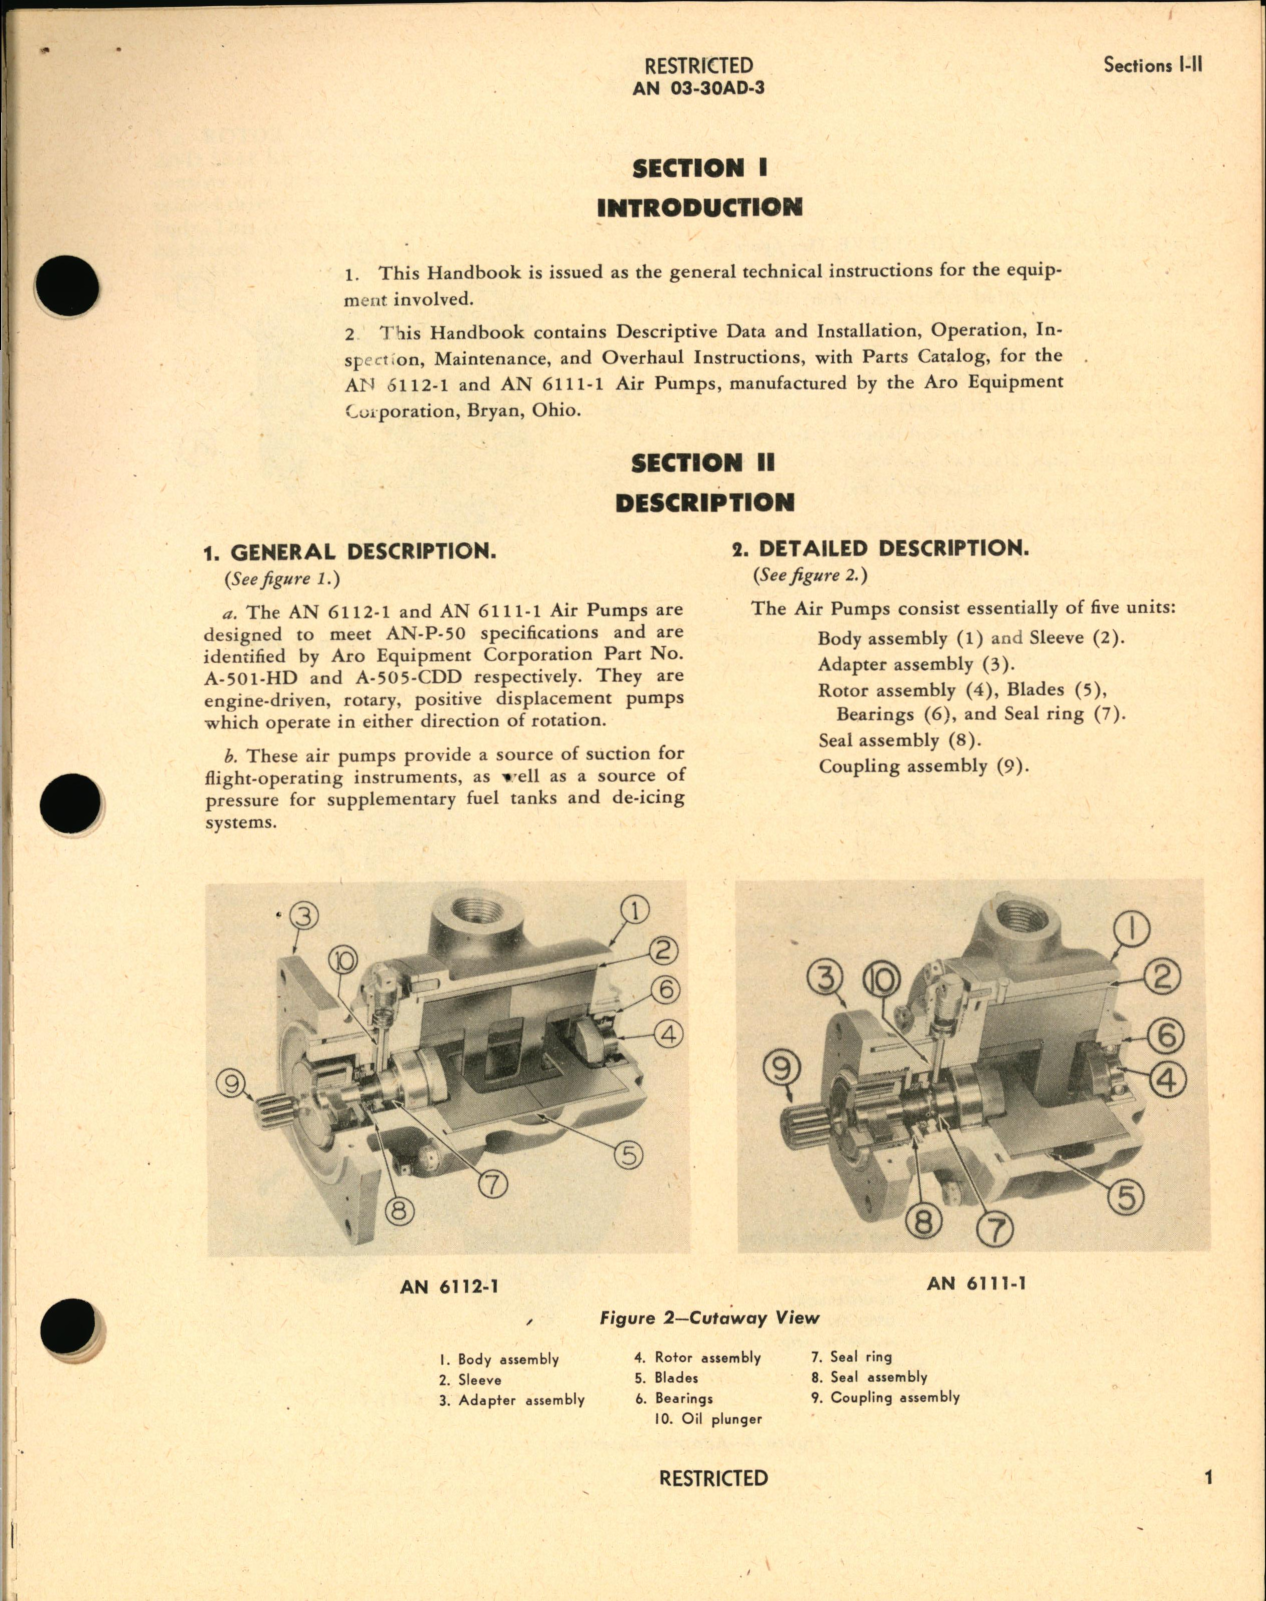 Sample page 5 from AirCorps Library document: Operation, Service and Overhaul Instructions with Parts Catalog for Air Pumps